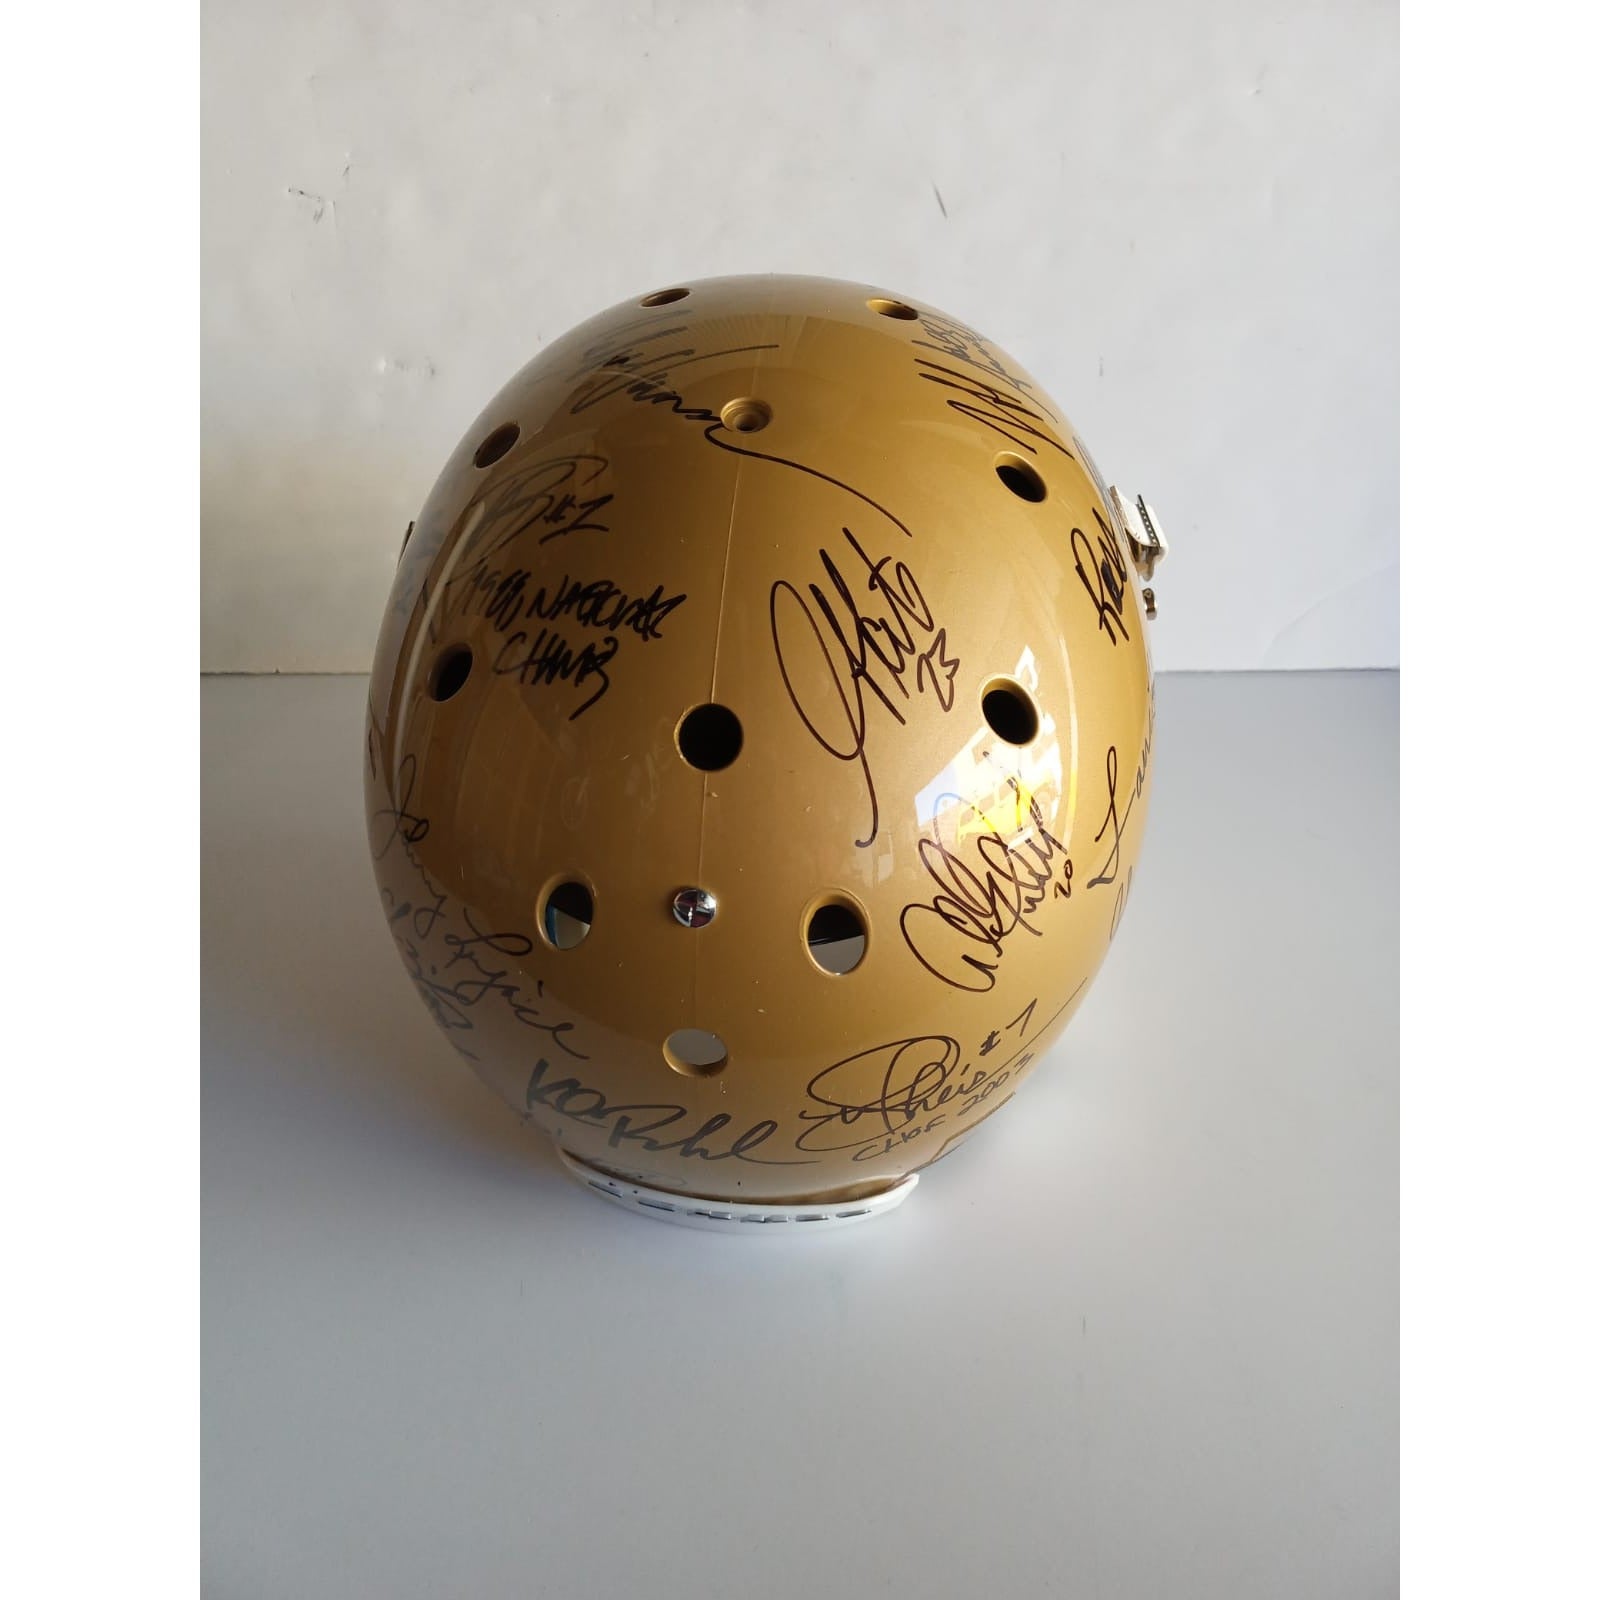 Notre Dame Fighting Irish all-time great football players signed replica helmet